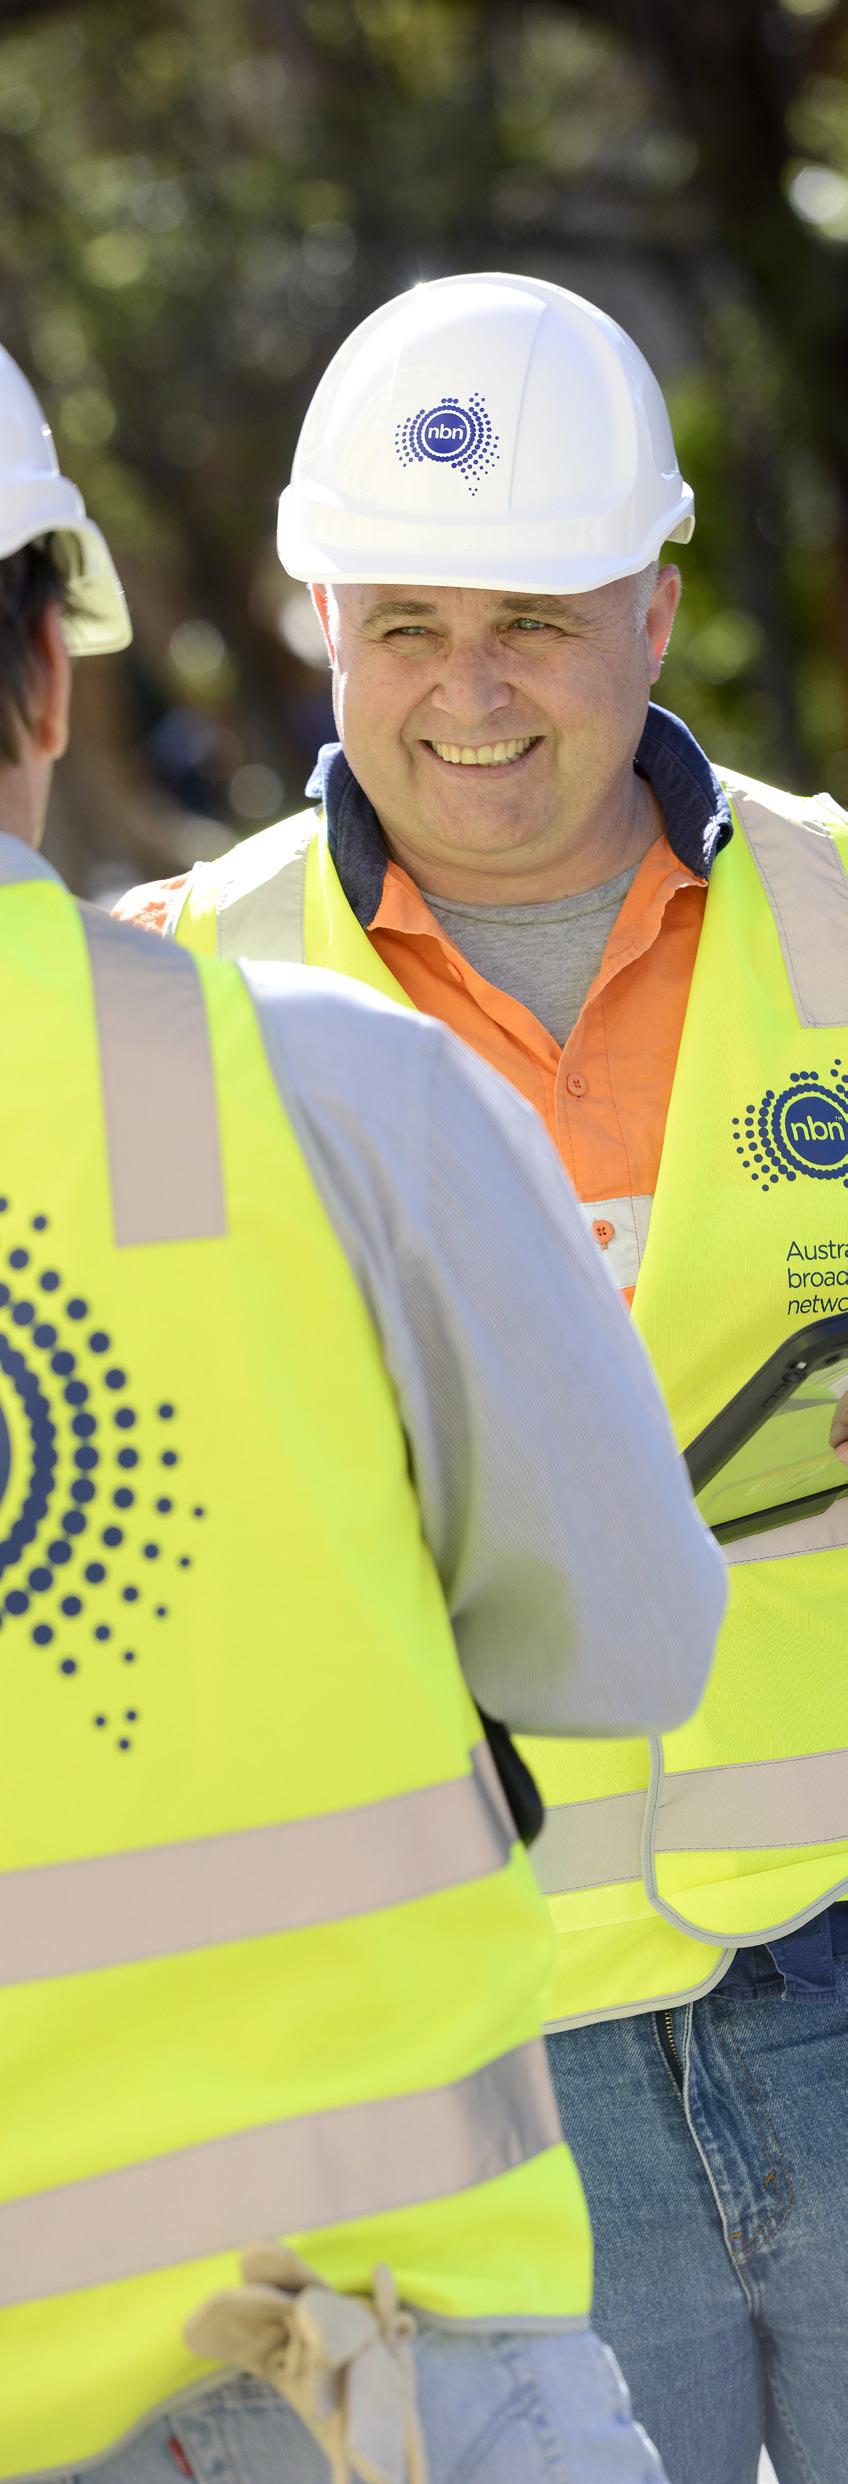 Since nbn has several Delivery Partners and subcontractors participating in the program, the actual roles and responsibilities they are seeking may differ to what may have been advised by nbn.